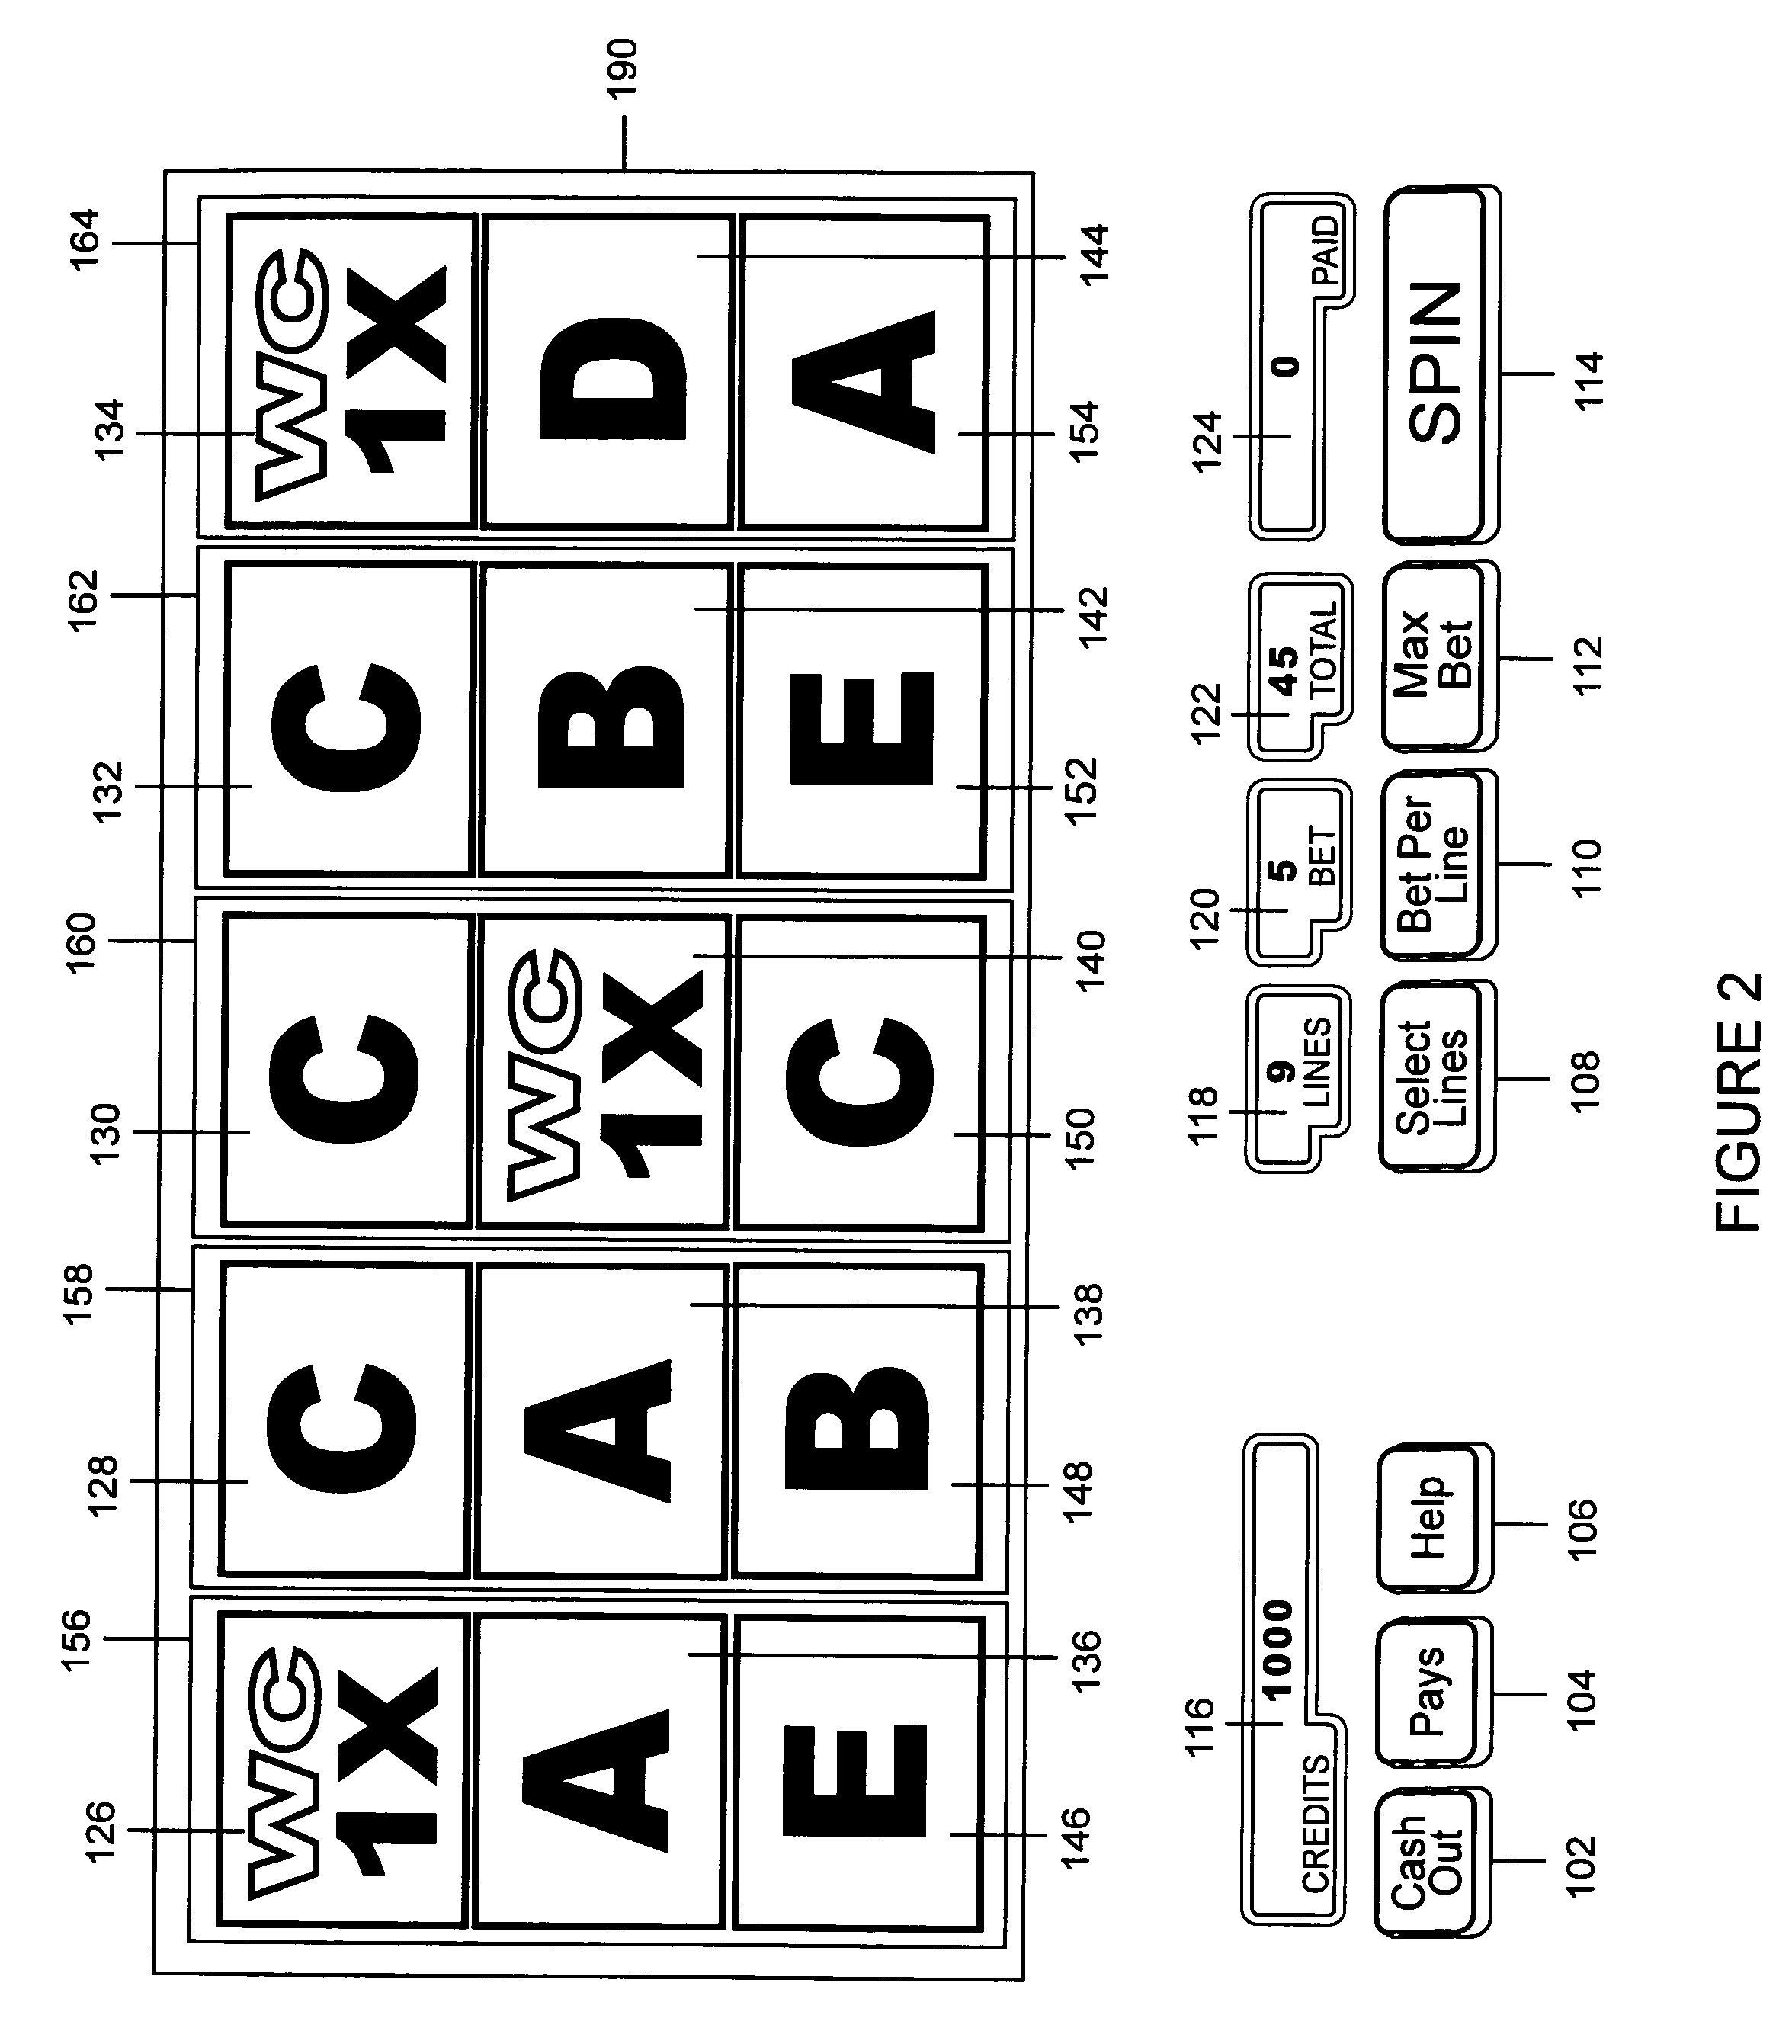 Method of playing a slot machine game with using wildcard symbols with randomly displayed multiplier values